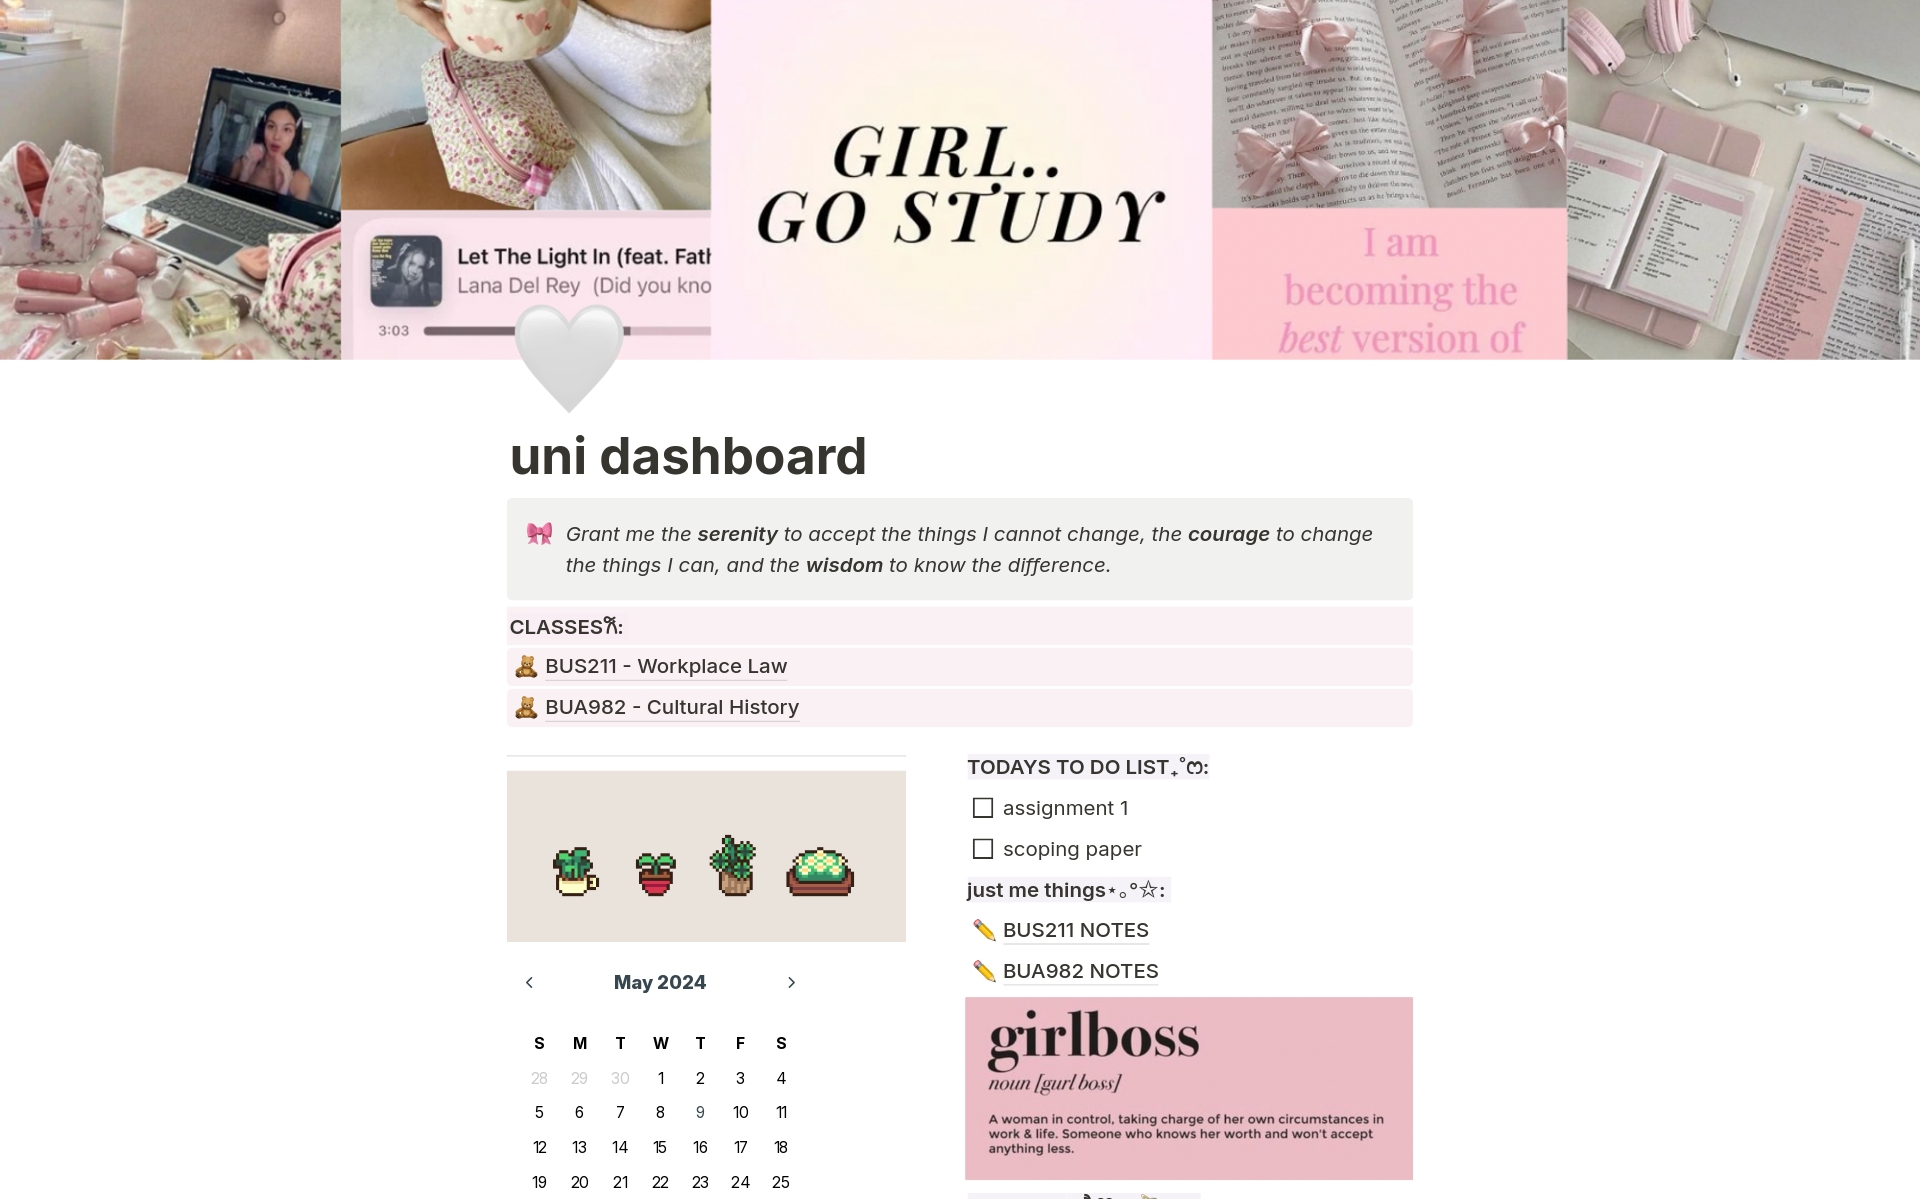 This is an all in one personal and student dashboard - consisting of university assignments, deadlines, groceries, workout, music. 